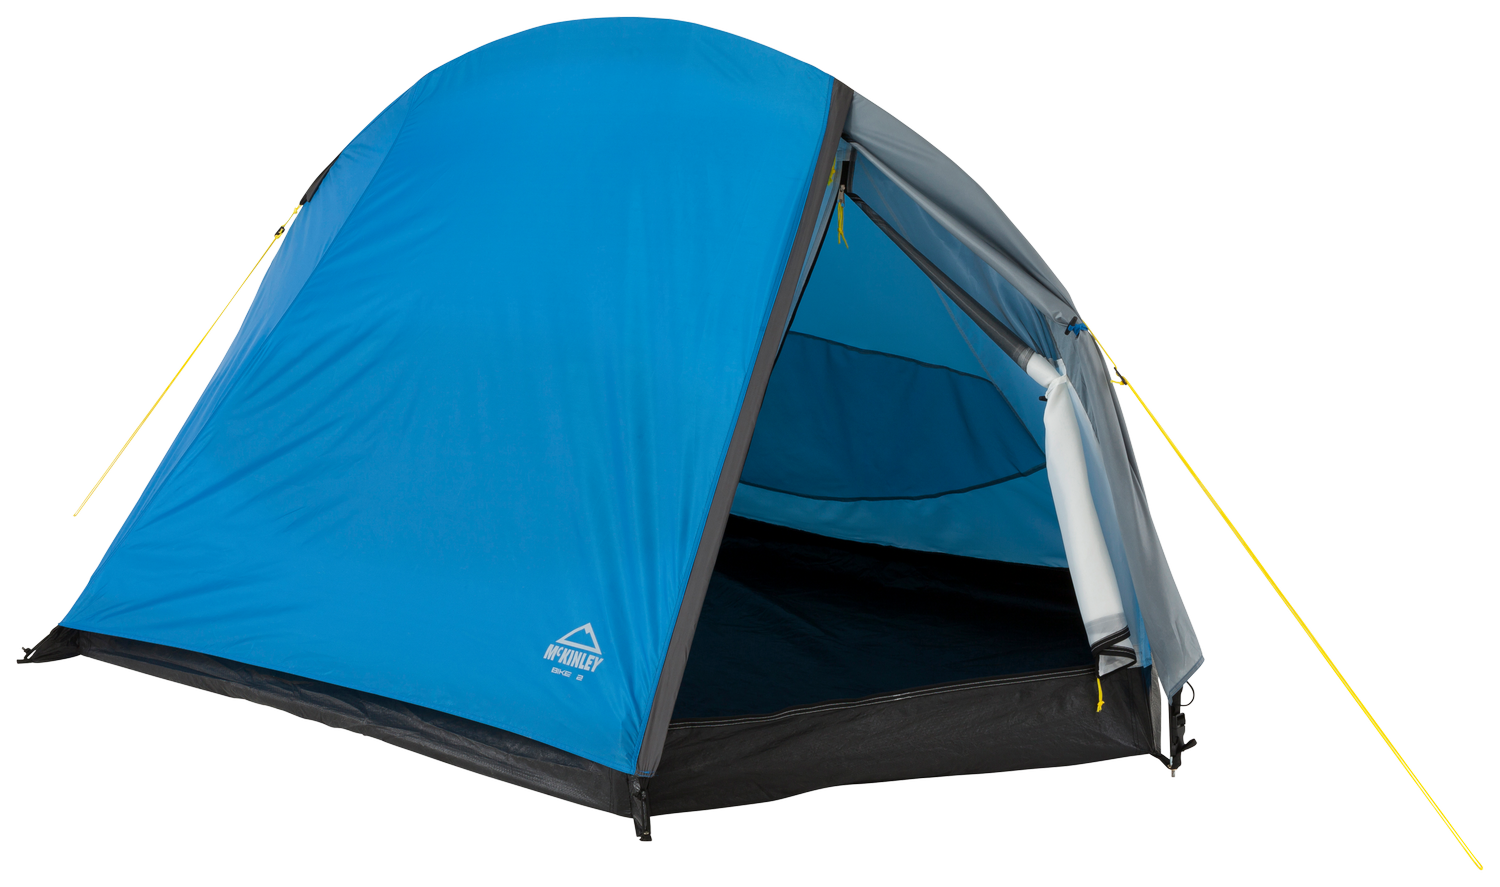 Camp Dome Tent Download Free Image PNG Image